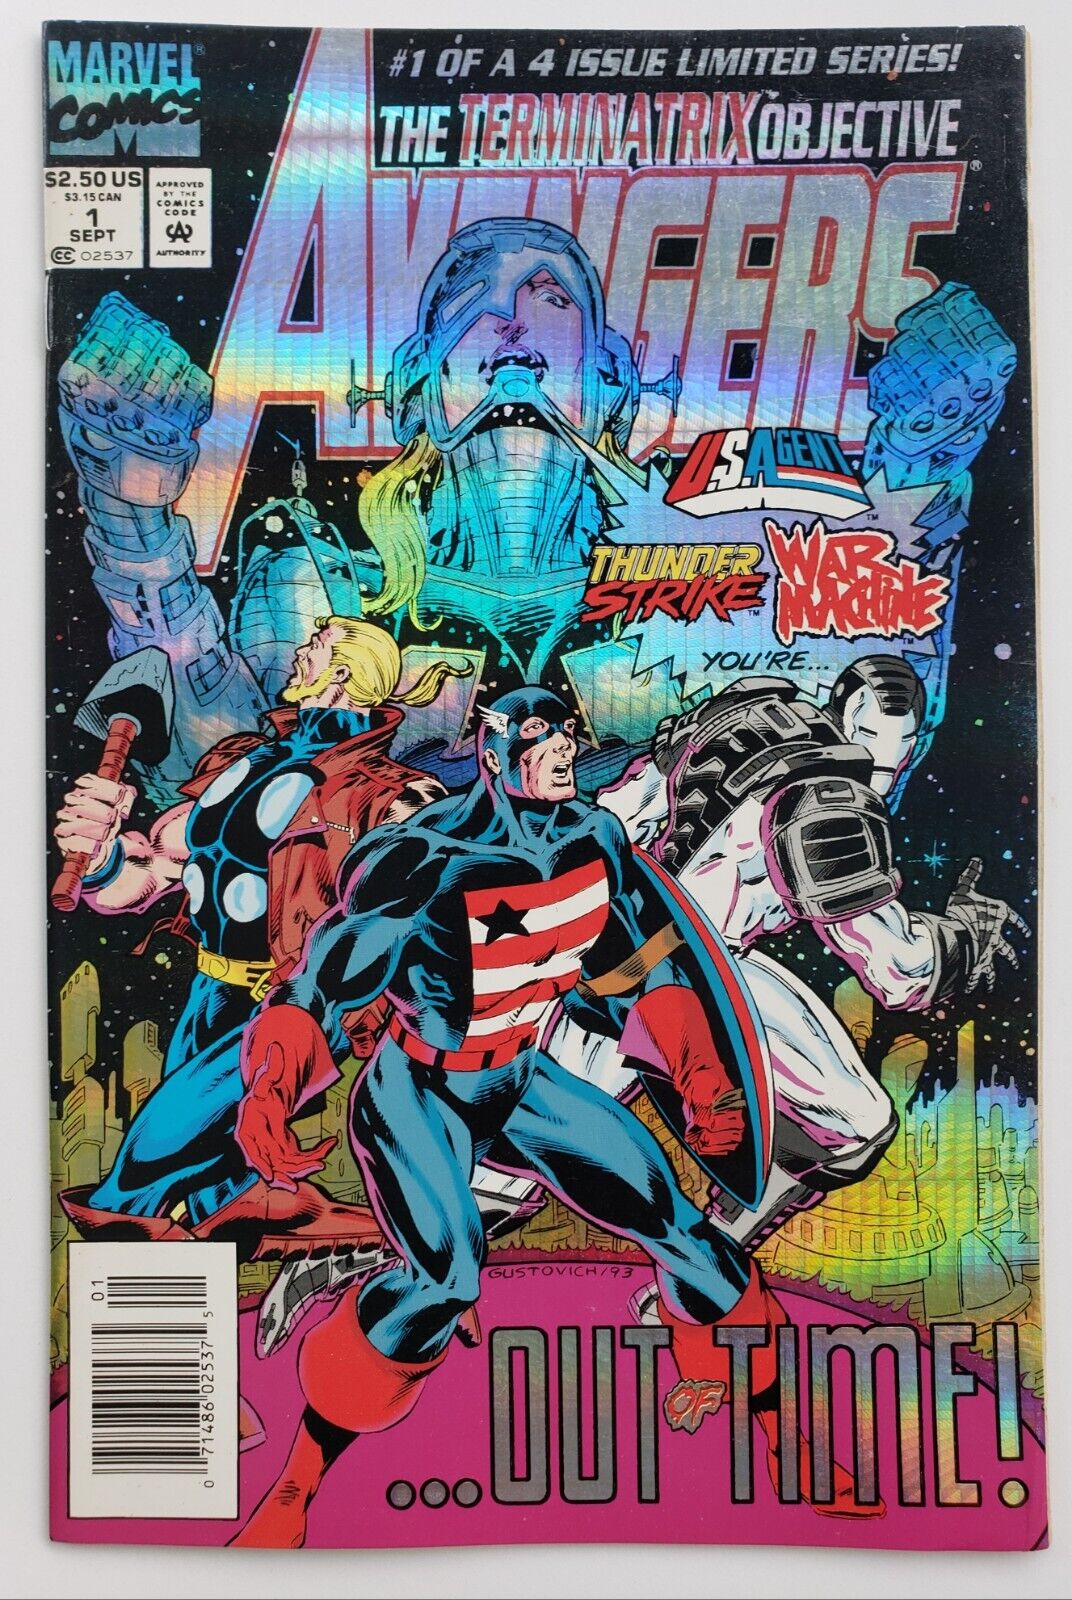 Avengers The Terminatrix Objective #1 Newsstand Marvel (1993) VF NM+ 1st Alioth